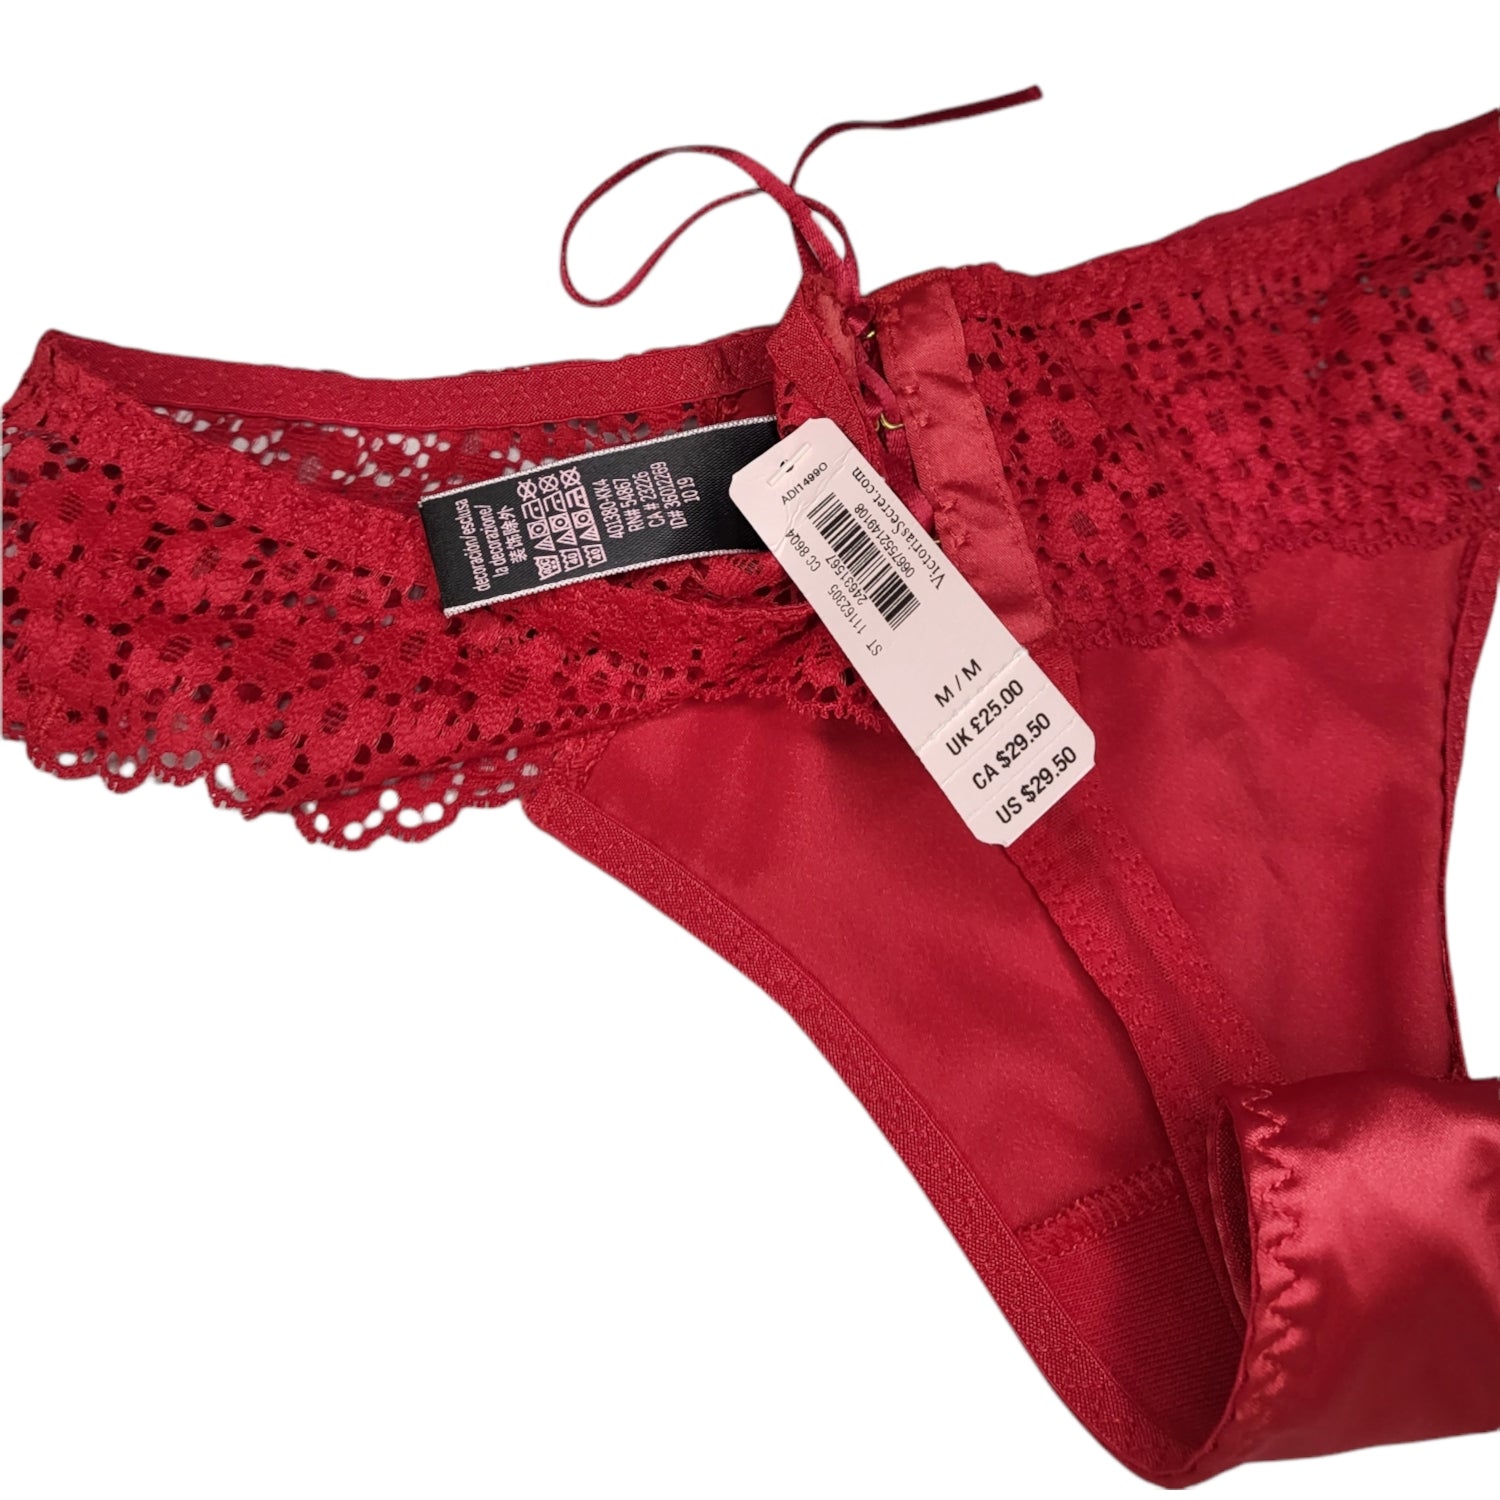 Victoria Secret Panty Small Thong Red Lace Satin Lace Up Back Very Sexy New